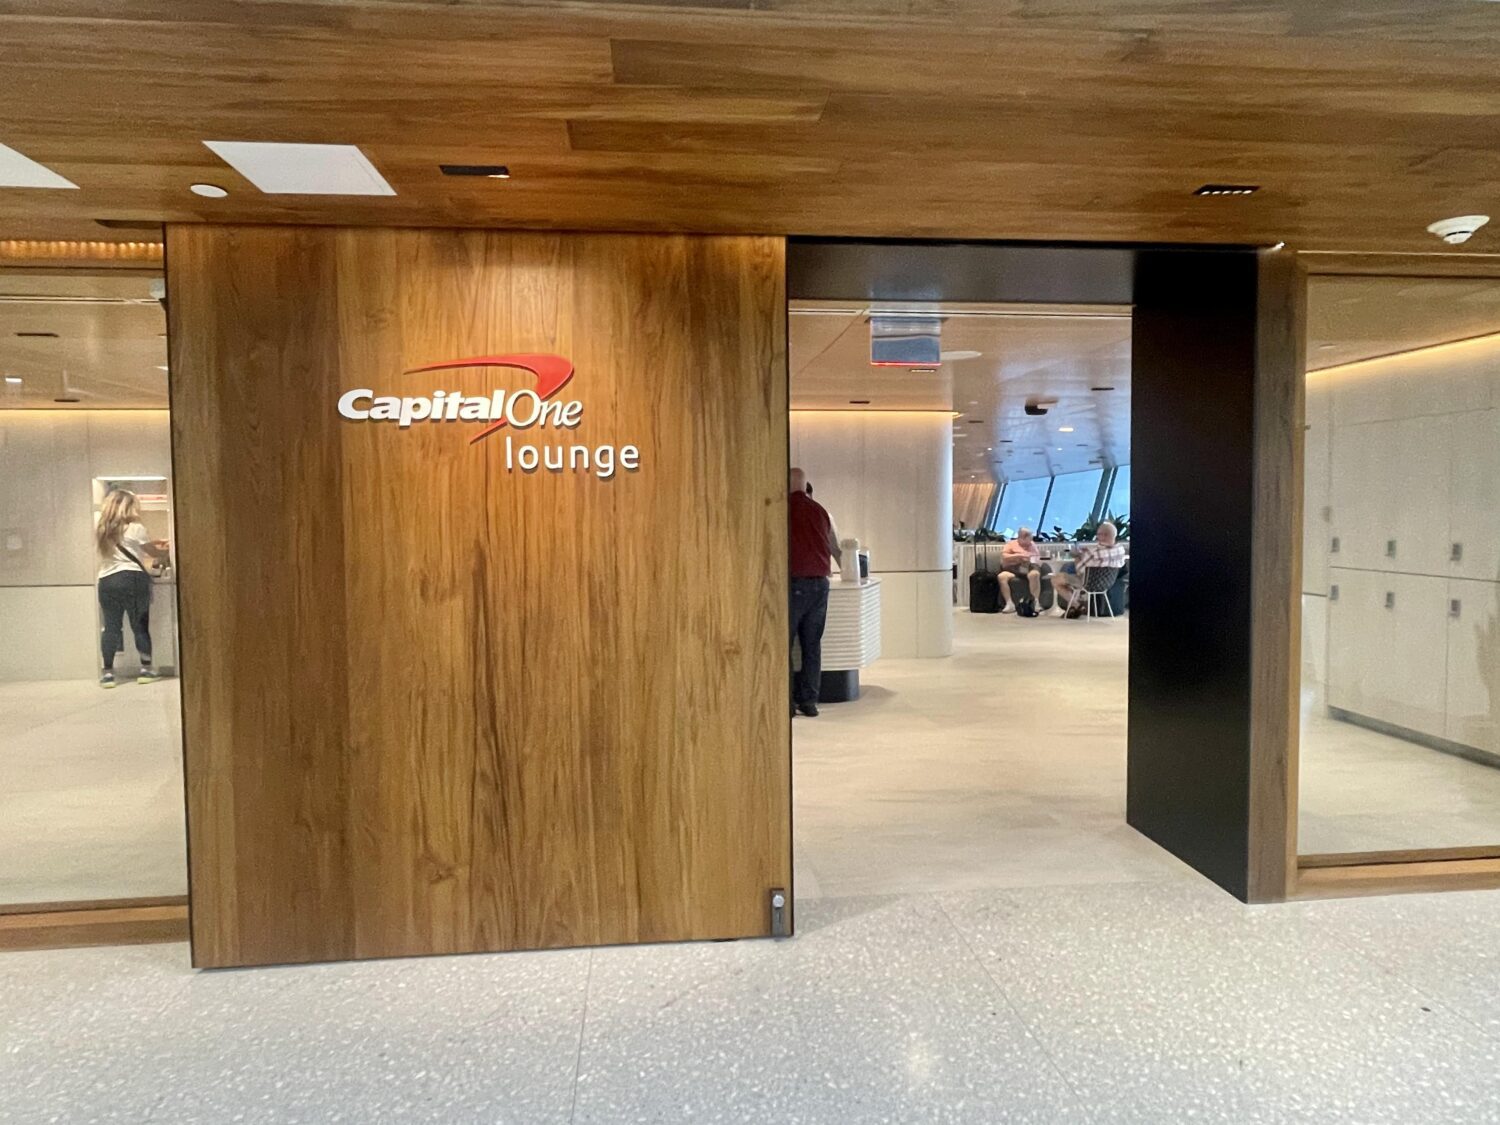 Dulles Capital One Lounge enterence